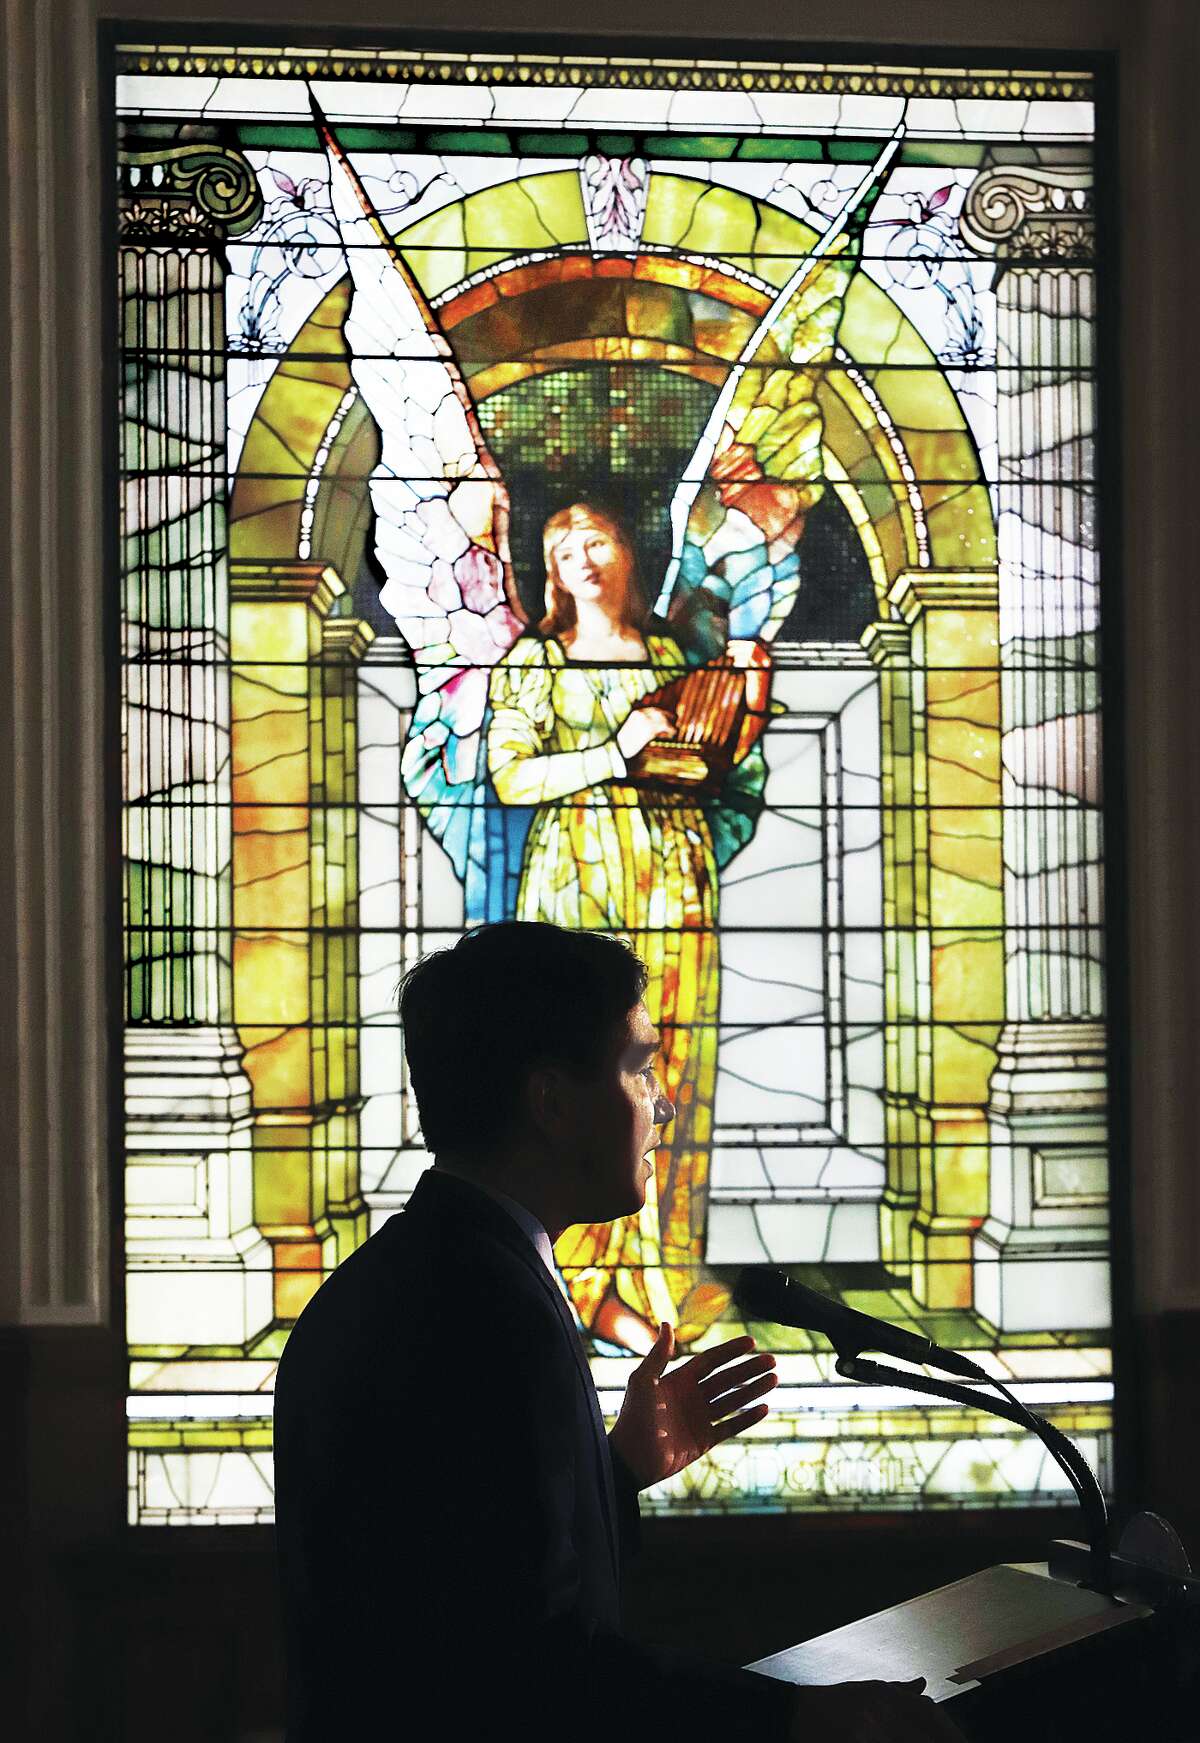 State Sen. Steve McClure, R-Springfield, is silhouetted in front of an 1890s stained glass window in the Reid Memorial Library during an announcement of $37.5 million in state funding to renovate the old main buildings of Lewis & Clark Community College in Godfrey. 